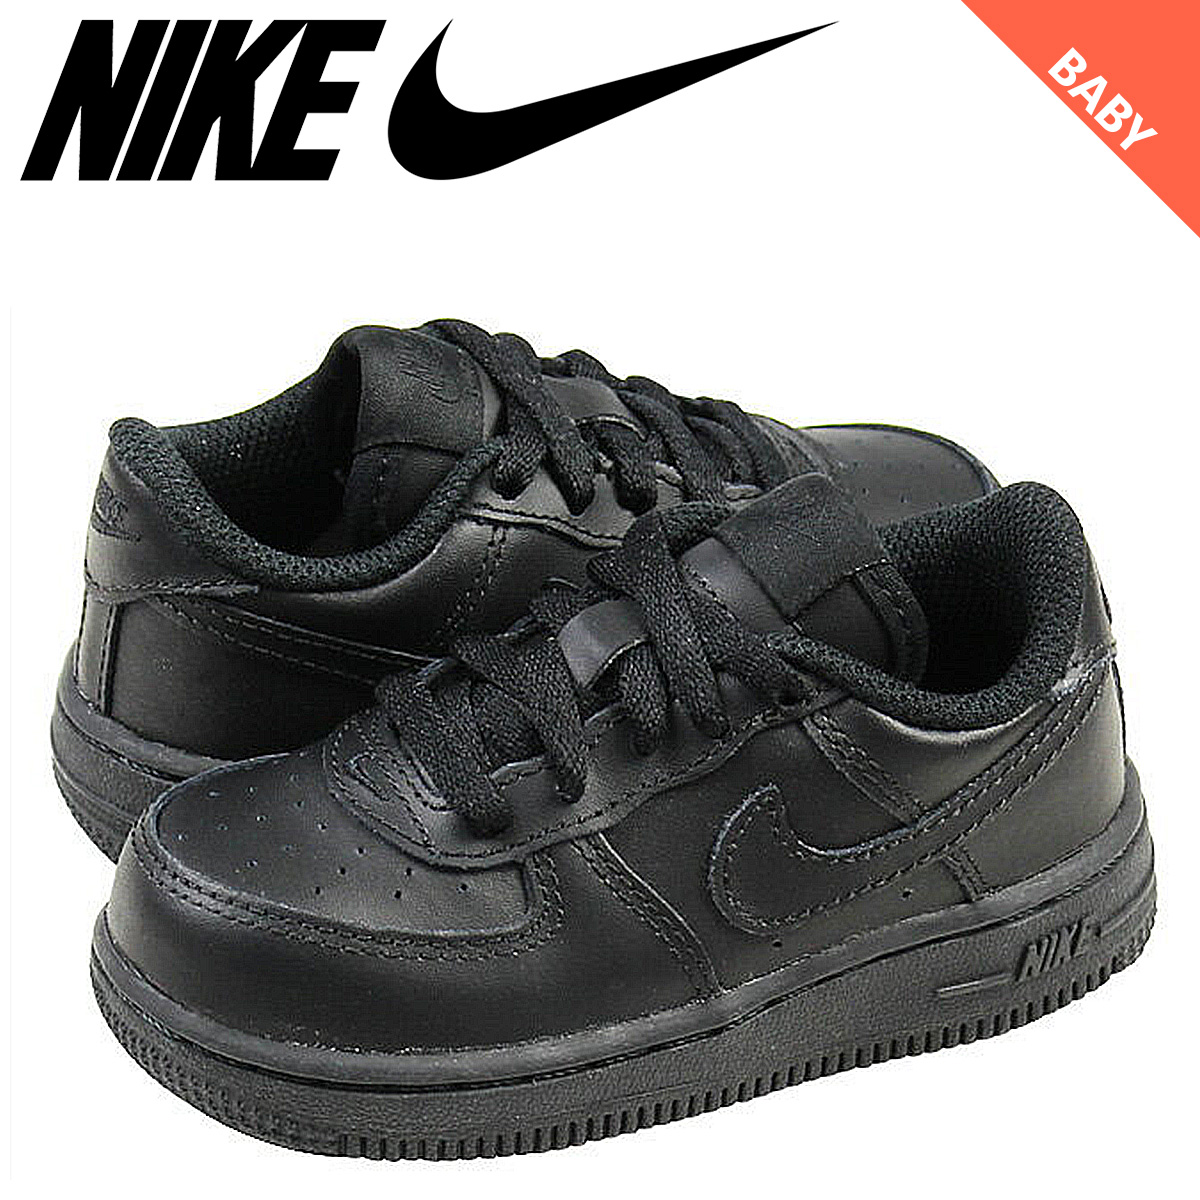 baby air forces